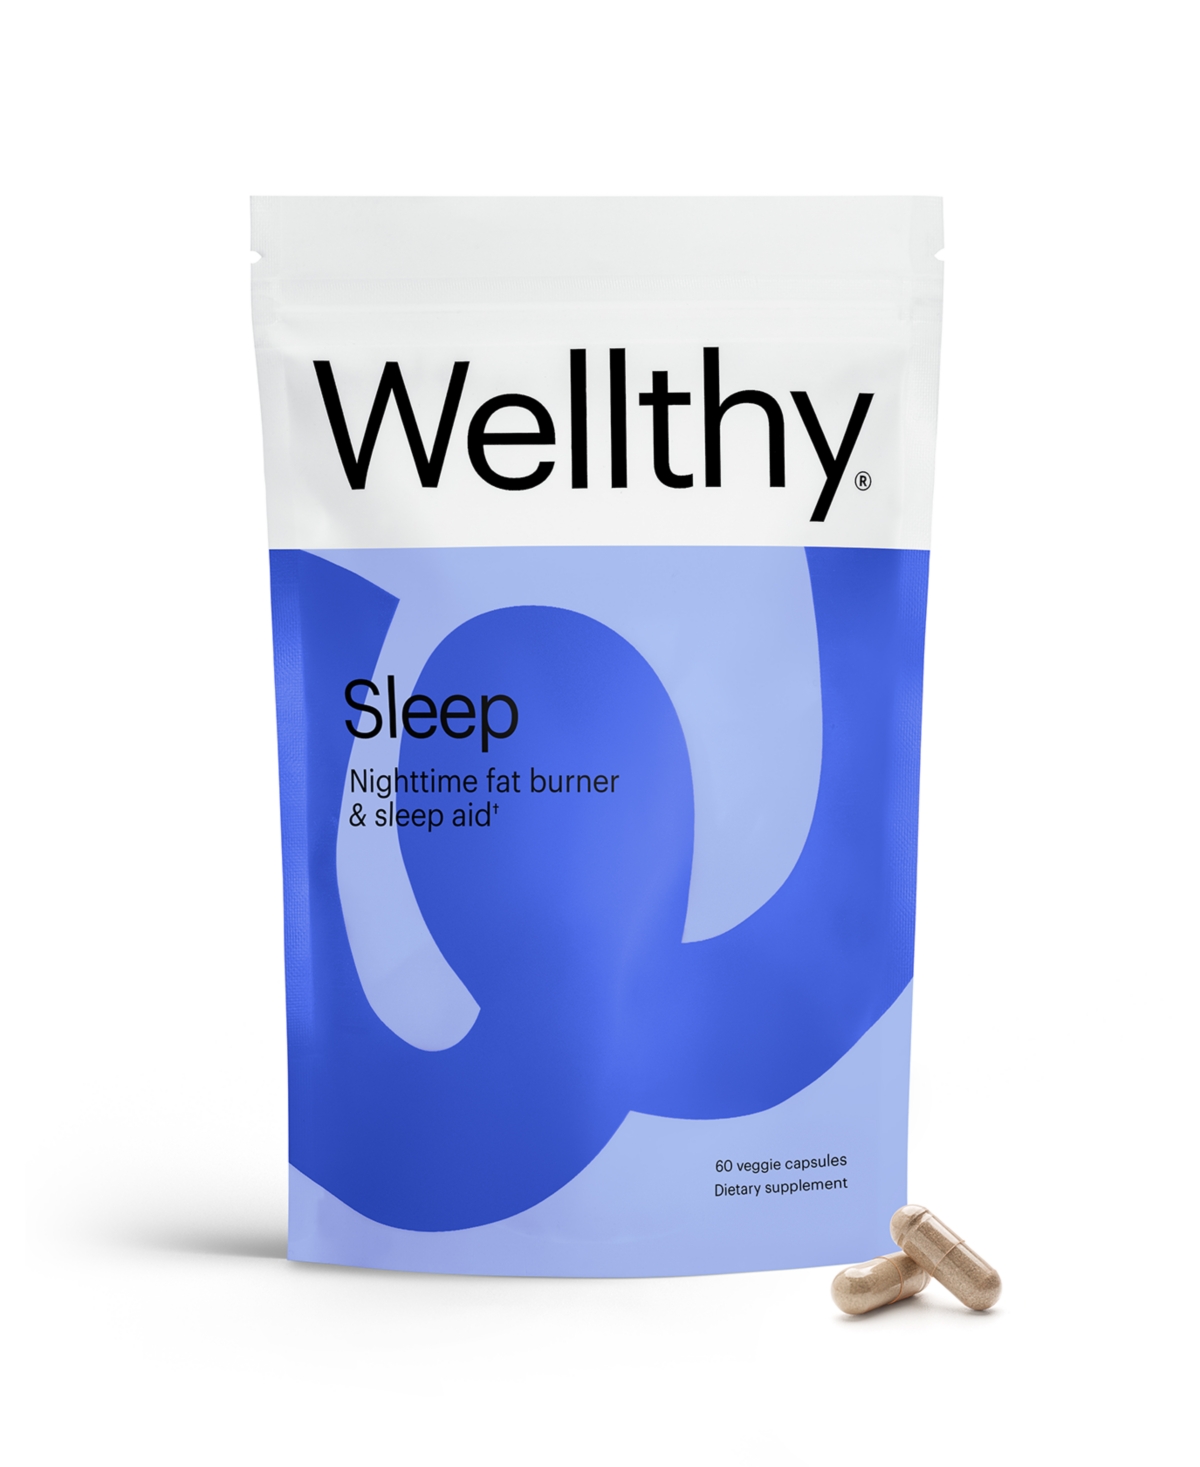 Sleep Herbal Supplement by Wellthy Capsules - 60 Count